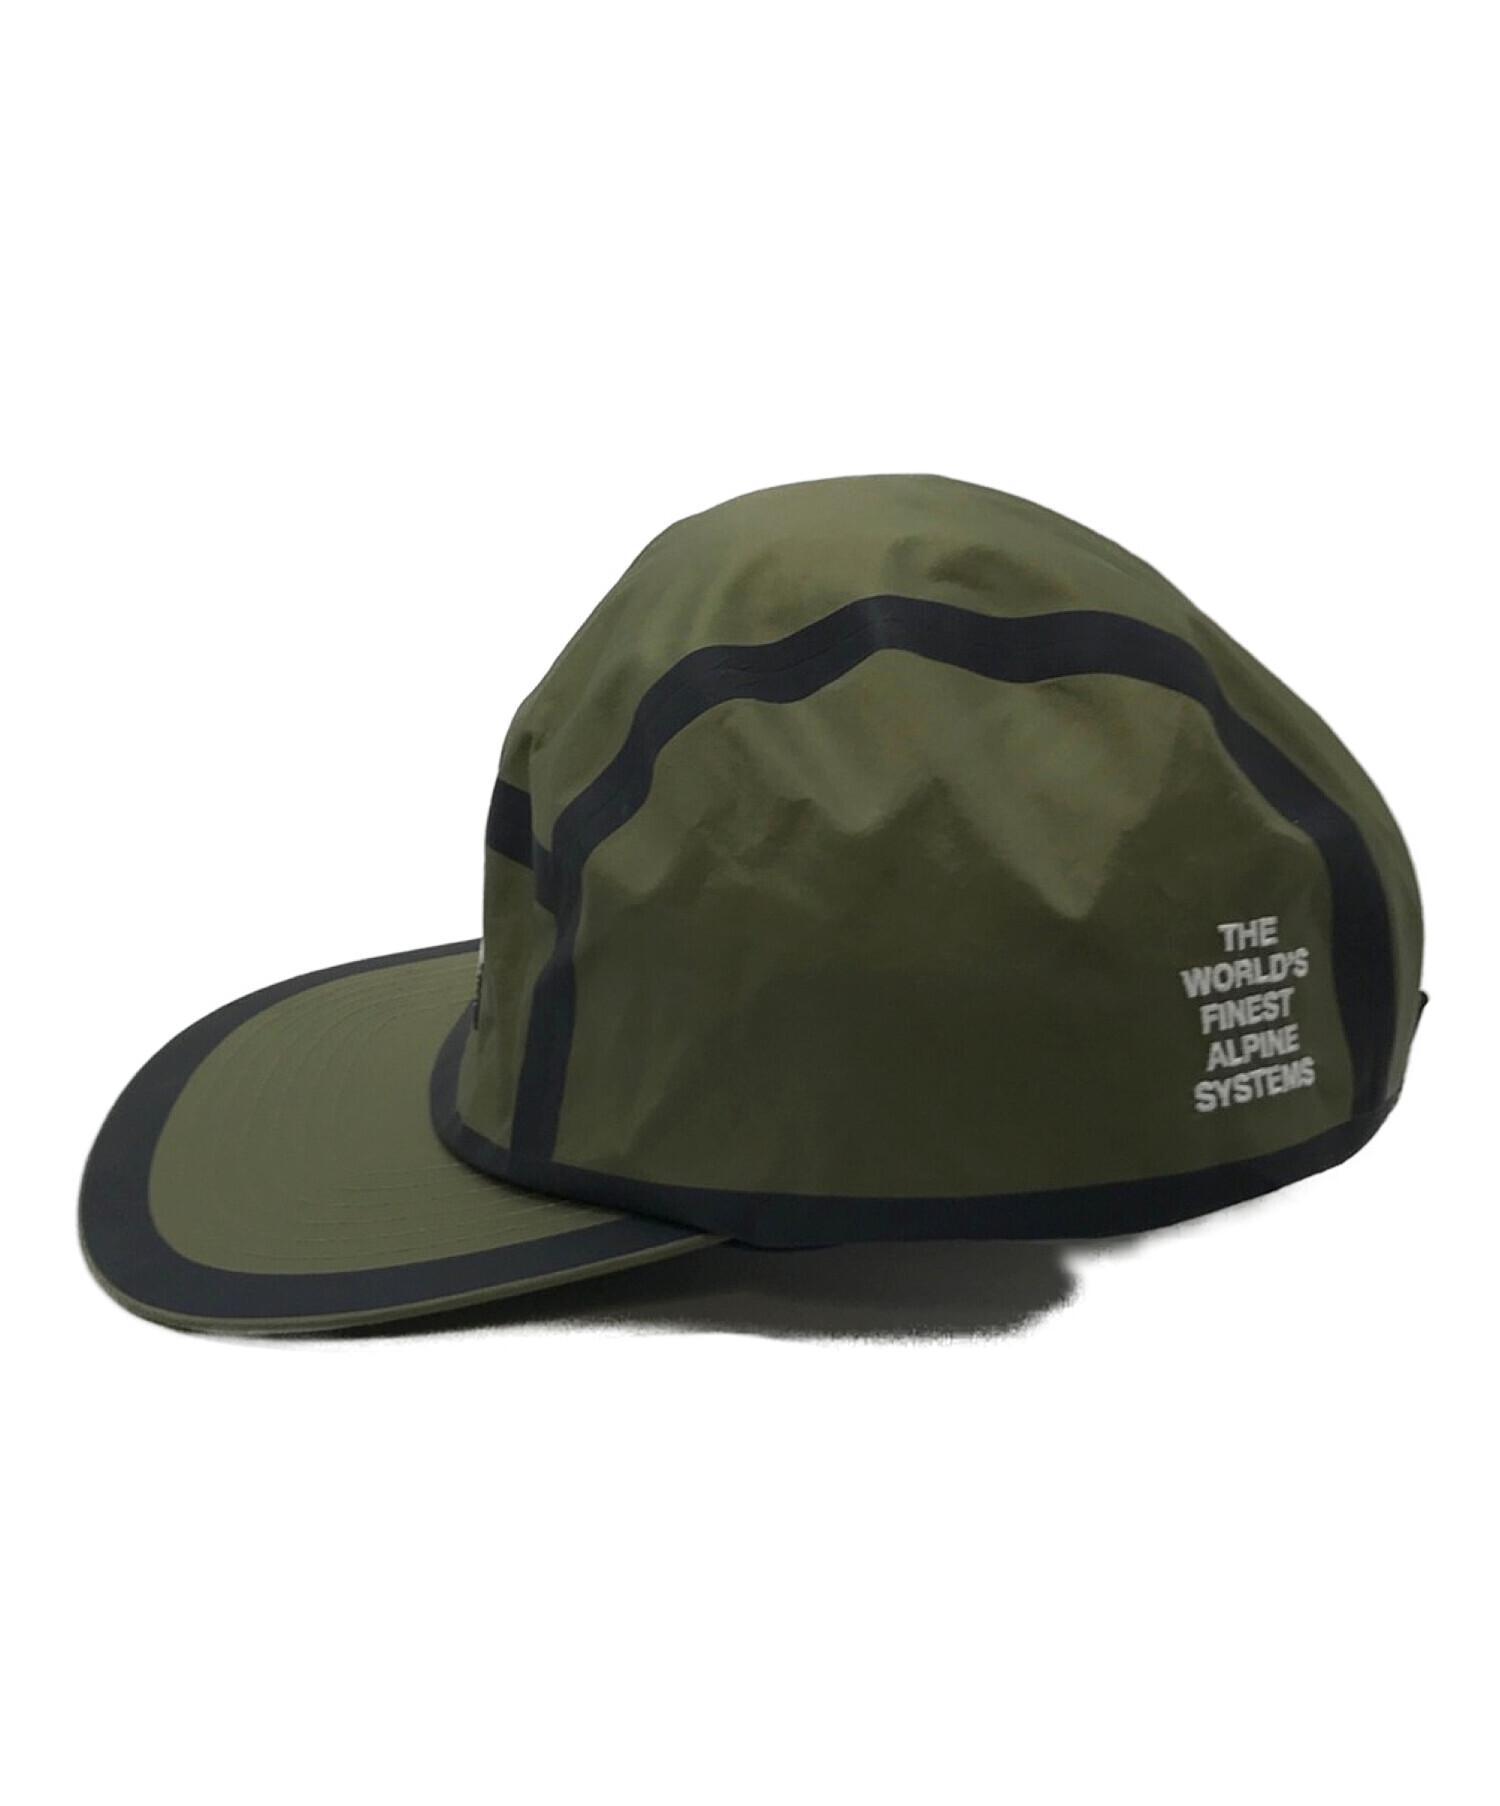 Supreme The North Face Camp Cap Olive